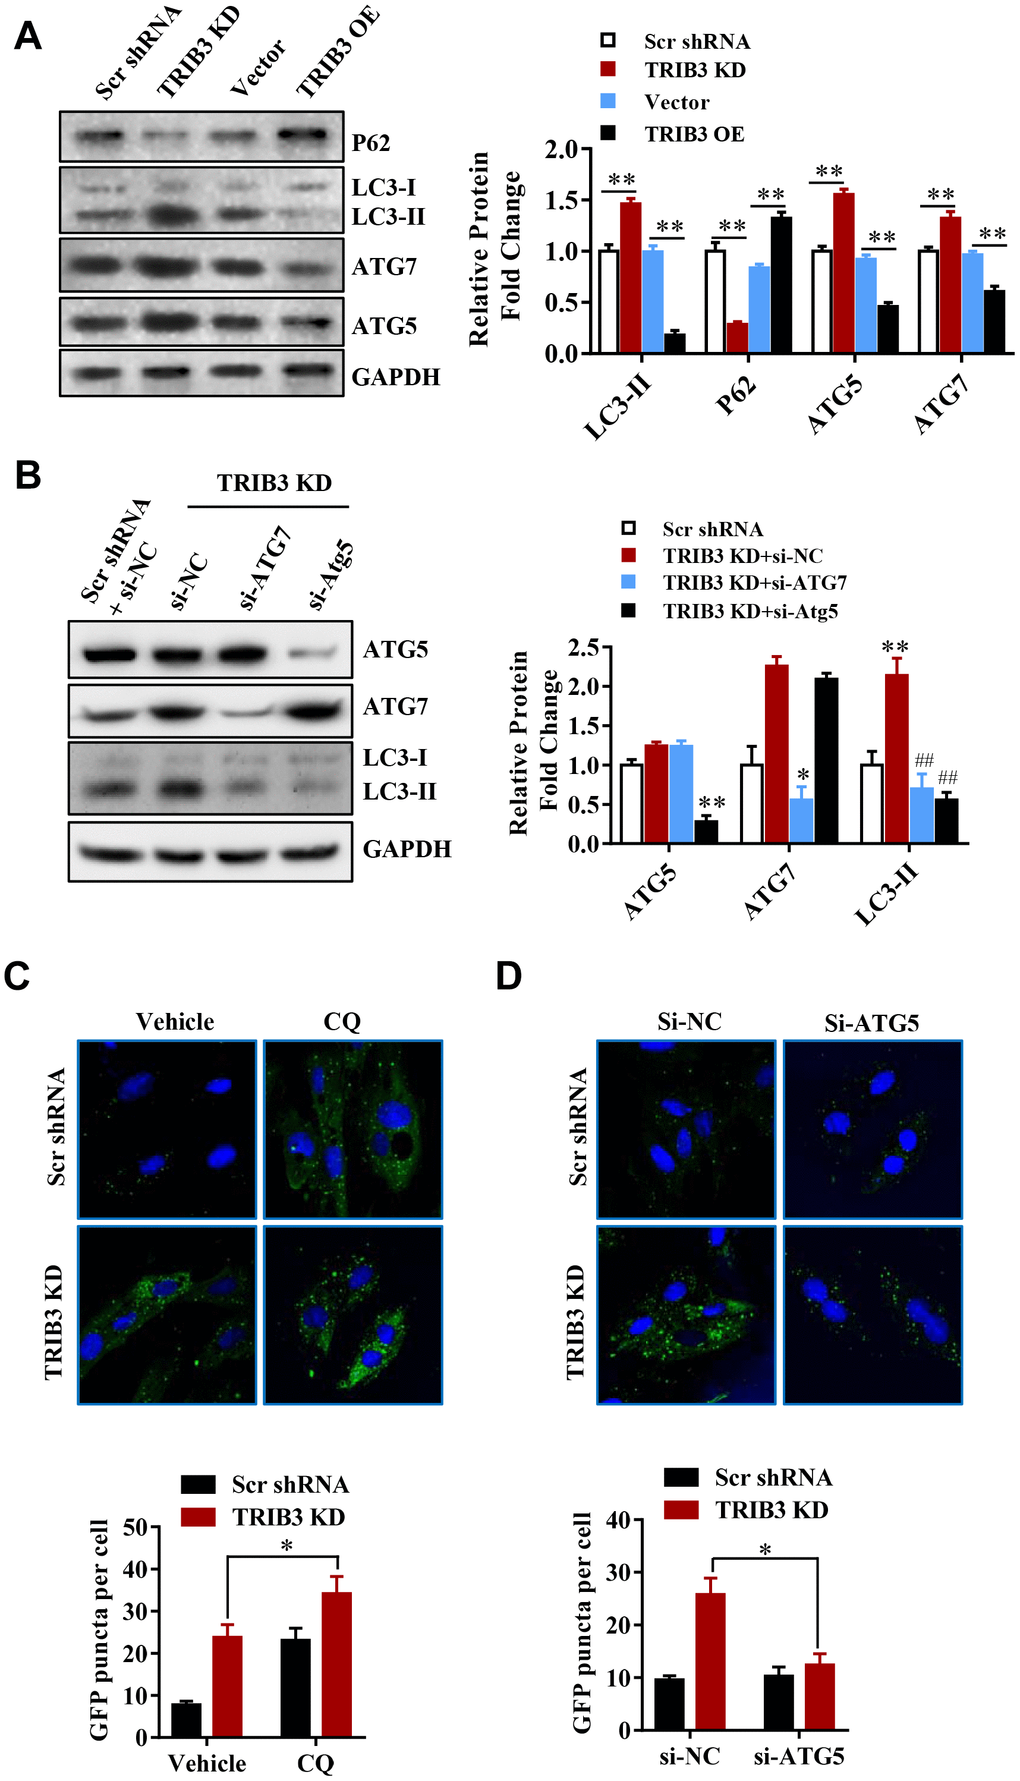 TRIB3 knockdown induces autophagy flux in GBM cells. (A) Western blot analysis to detect the protein levels of P62, LC3, ATG5, ATG7, and GAPDH (control for loading) in U251 cells treated with Ad-Scr, Ad-siTRIB3, Ad-vector, and Ad-TRIB3 for 48 h. Data are representative of 3 independent experiments. (B) Western blot analysis of LC3, ATG5, ATG7, and GAPDH in U251 cells treated with Ad-Scr+si-NC, Ad-siTRIB3+si-NC, Ad-siTRIB3+si-ATG7, and Ad-siTRIB3+si-ATG5 for 48 h. Data are representative of 3 independent experiments. (C) Fluorescence images of GFP-MAP1LC3B puncta in U251 cells pretreated with autophagy inhibitors (CQ) or vehicle (DMSO) followed by transfection of scramble RNA or TRIB3 siRNA for 48 h. (D) Fluorescence images of GFP-MAP1LC3B puncta in U251 cells transfected with si-NC or ATG5 siRNAs followed by transfection of scramble RNA or TRIB3 siRNA for 48 h. *p##p